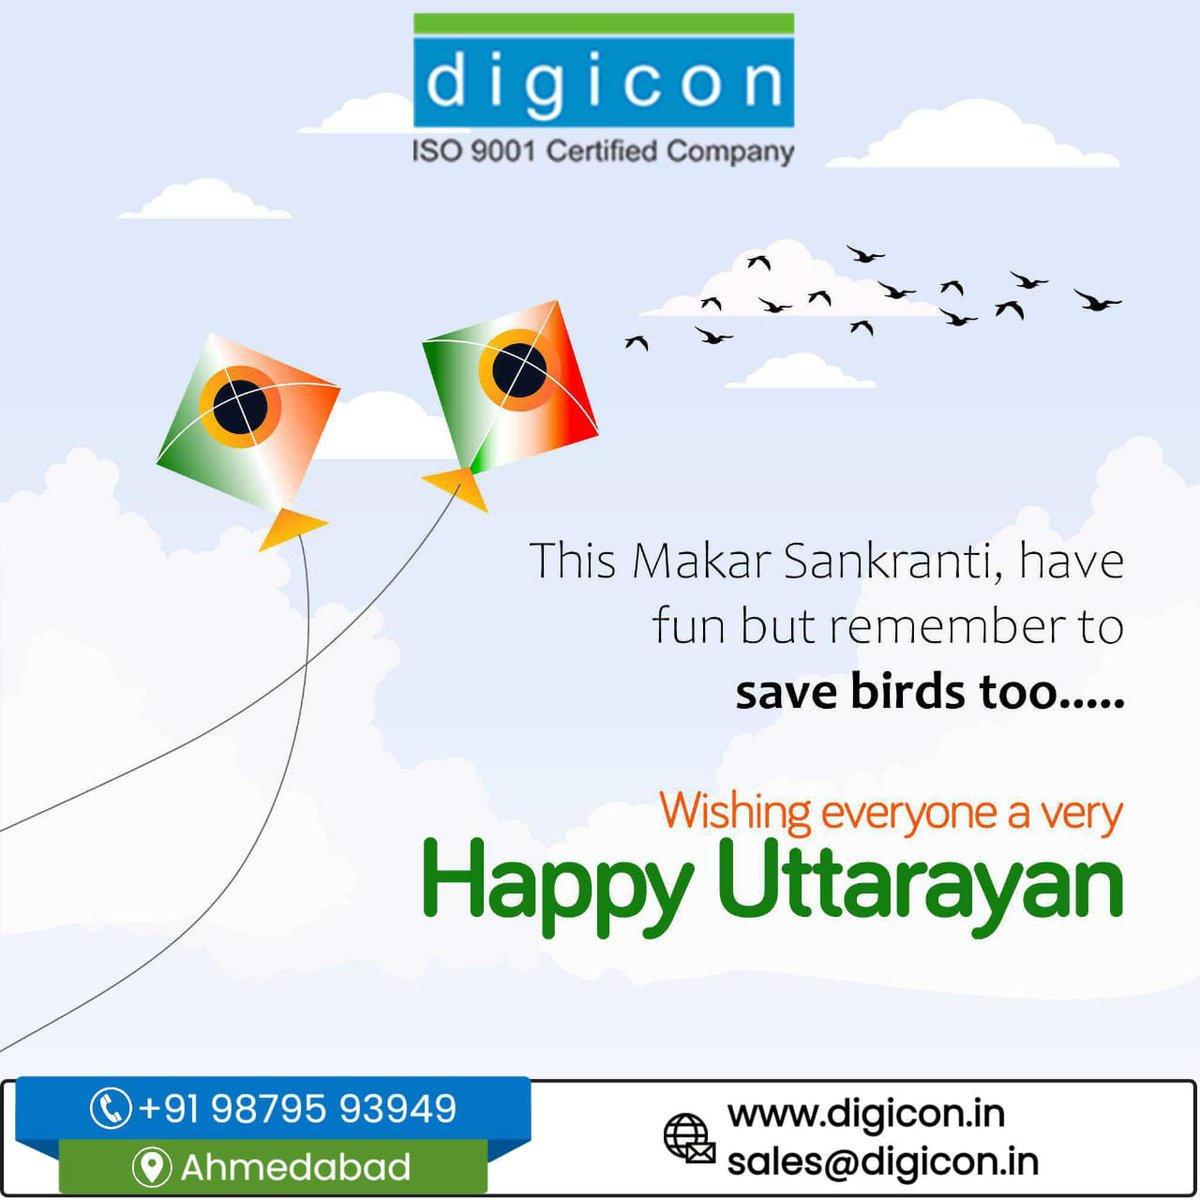 Digicon Automation wishes you a very happy makar sankranti.

#digiconautomation #MakarSankranti2023 #Uttrayan #Gujarat #automation #vfdpanel #acdrive #plc #hmi #scada #panel #automationsolution